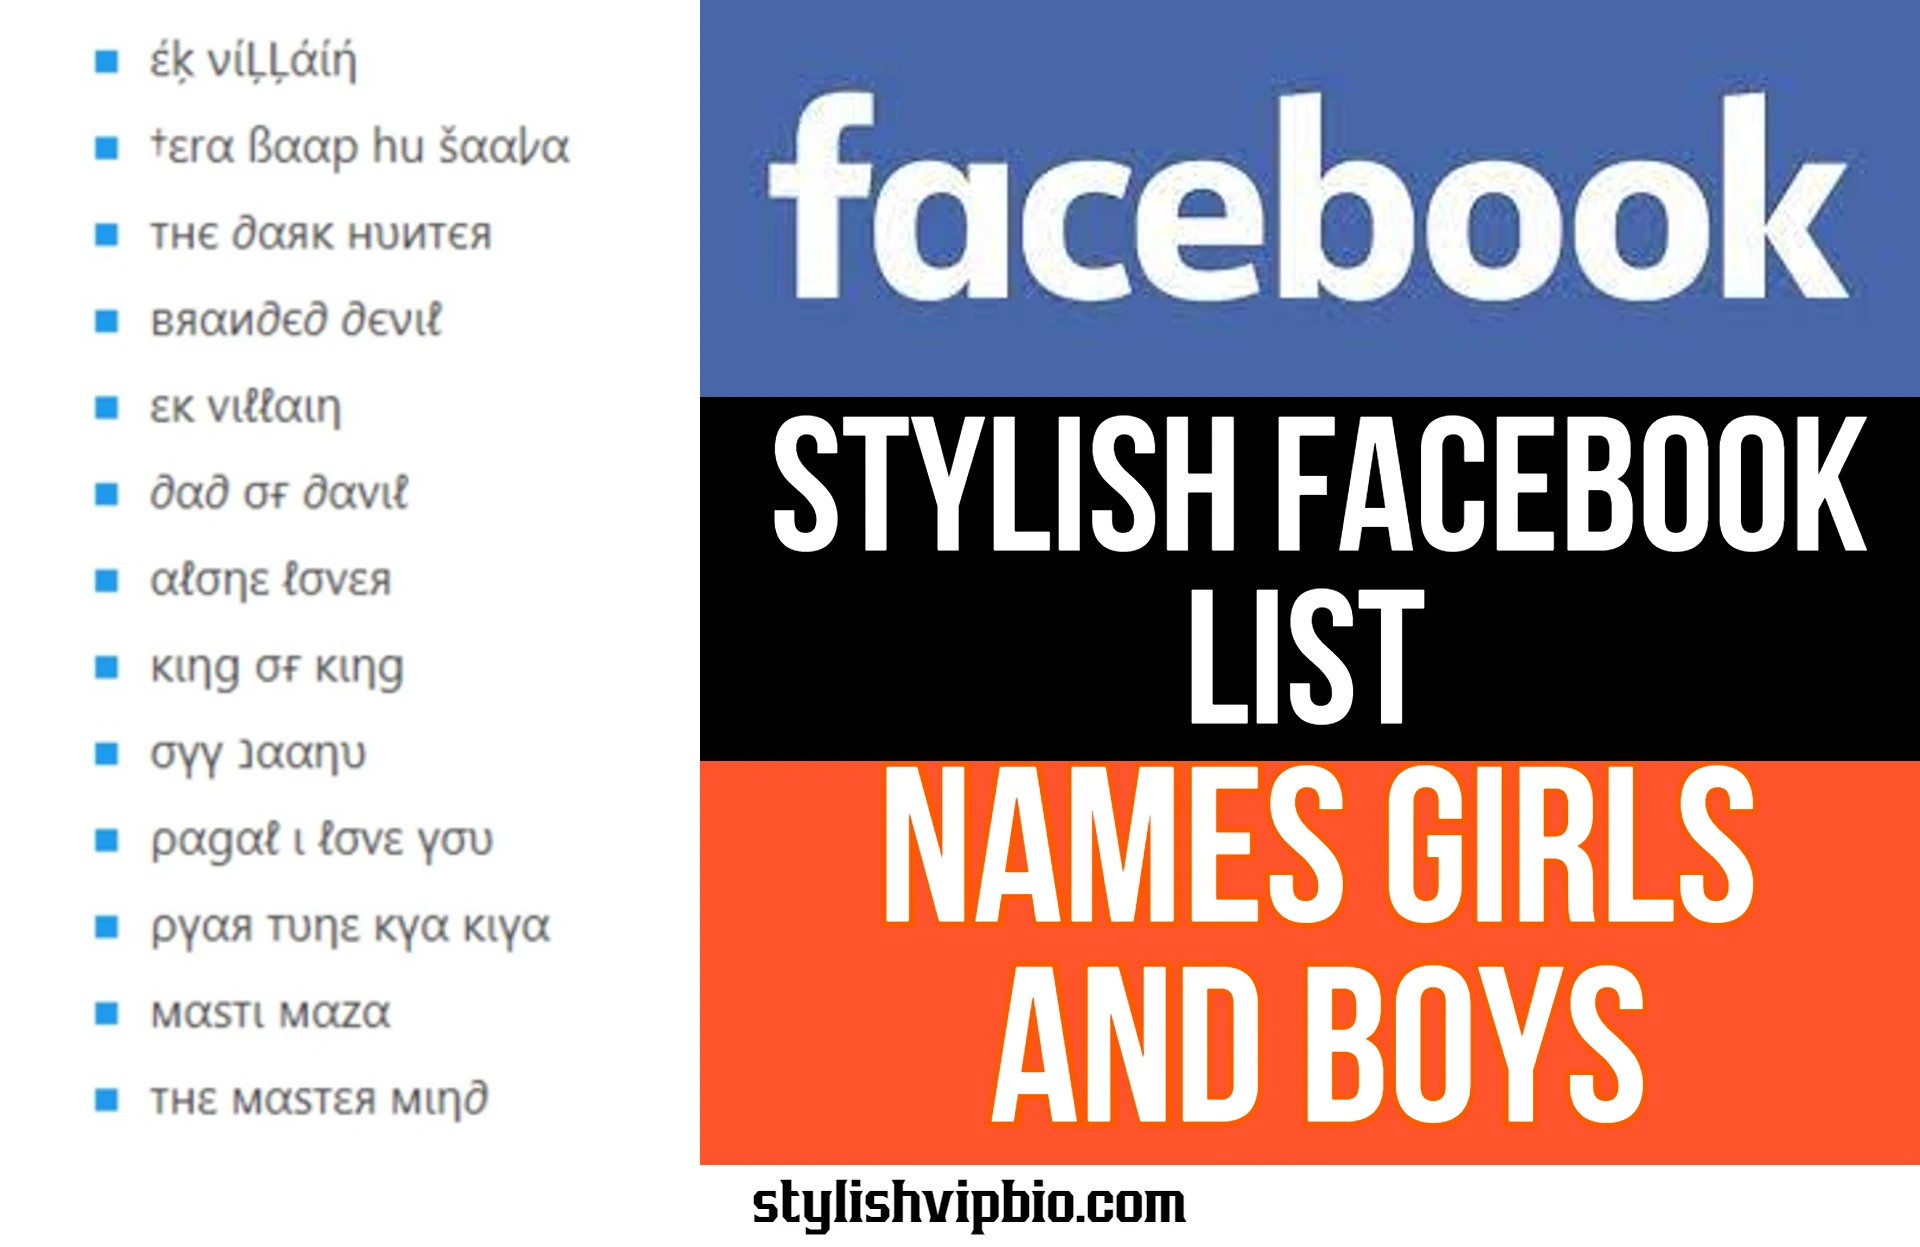 Stylish Facebook List Names Girls And Boys